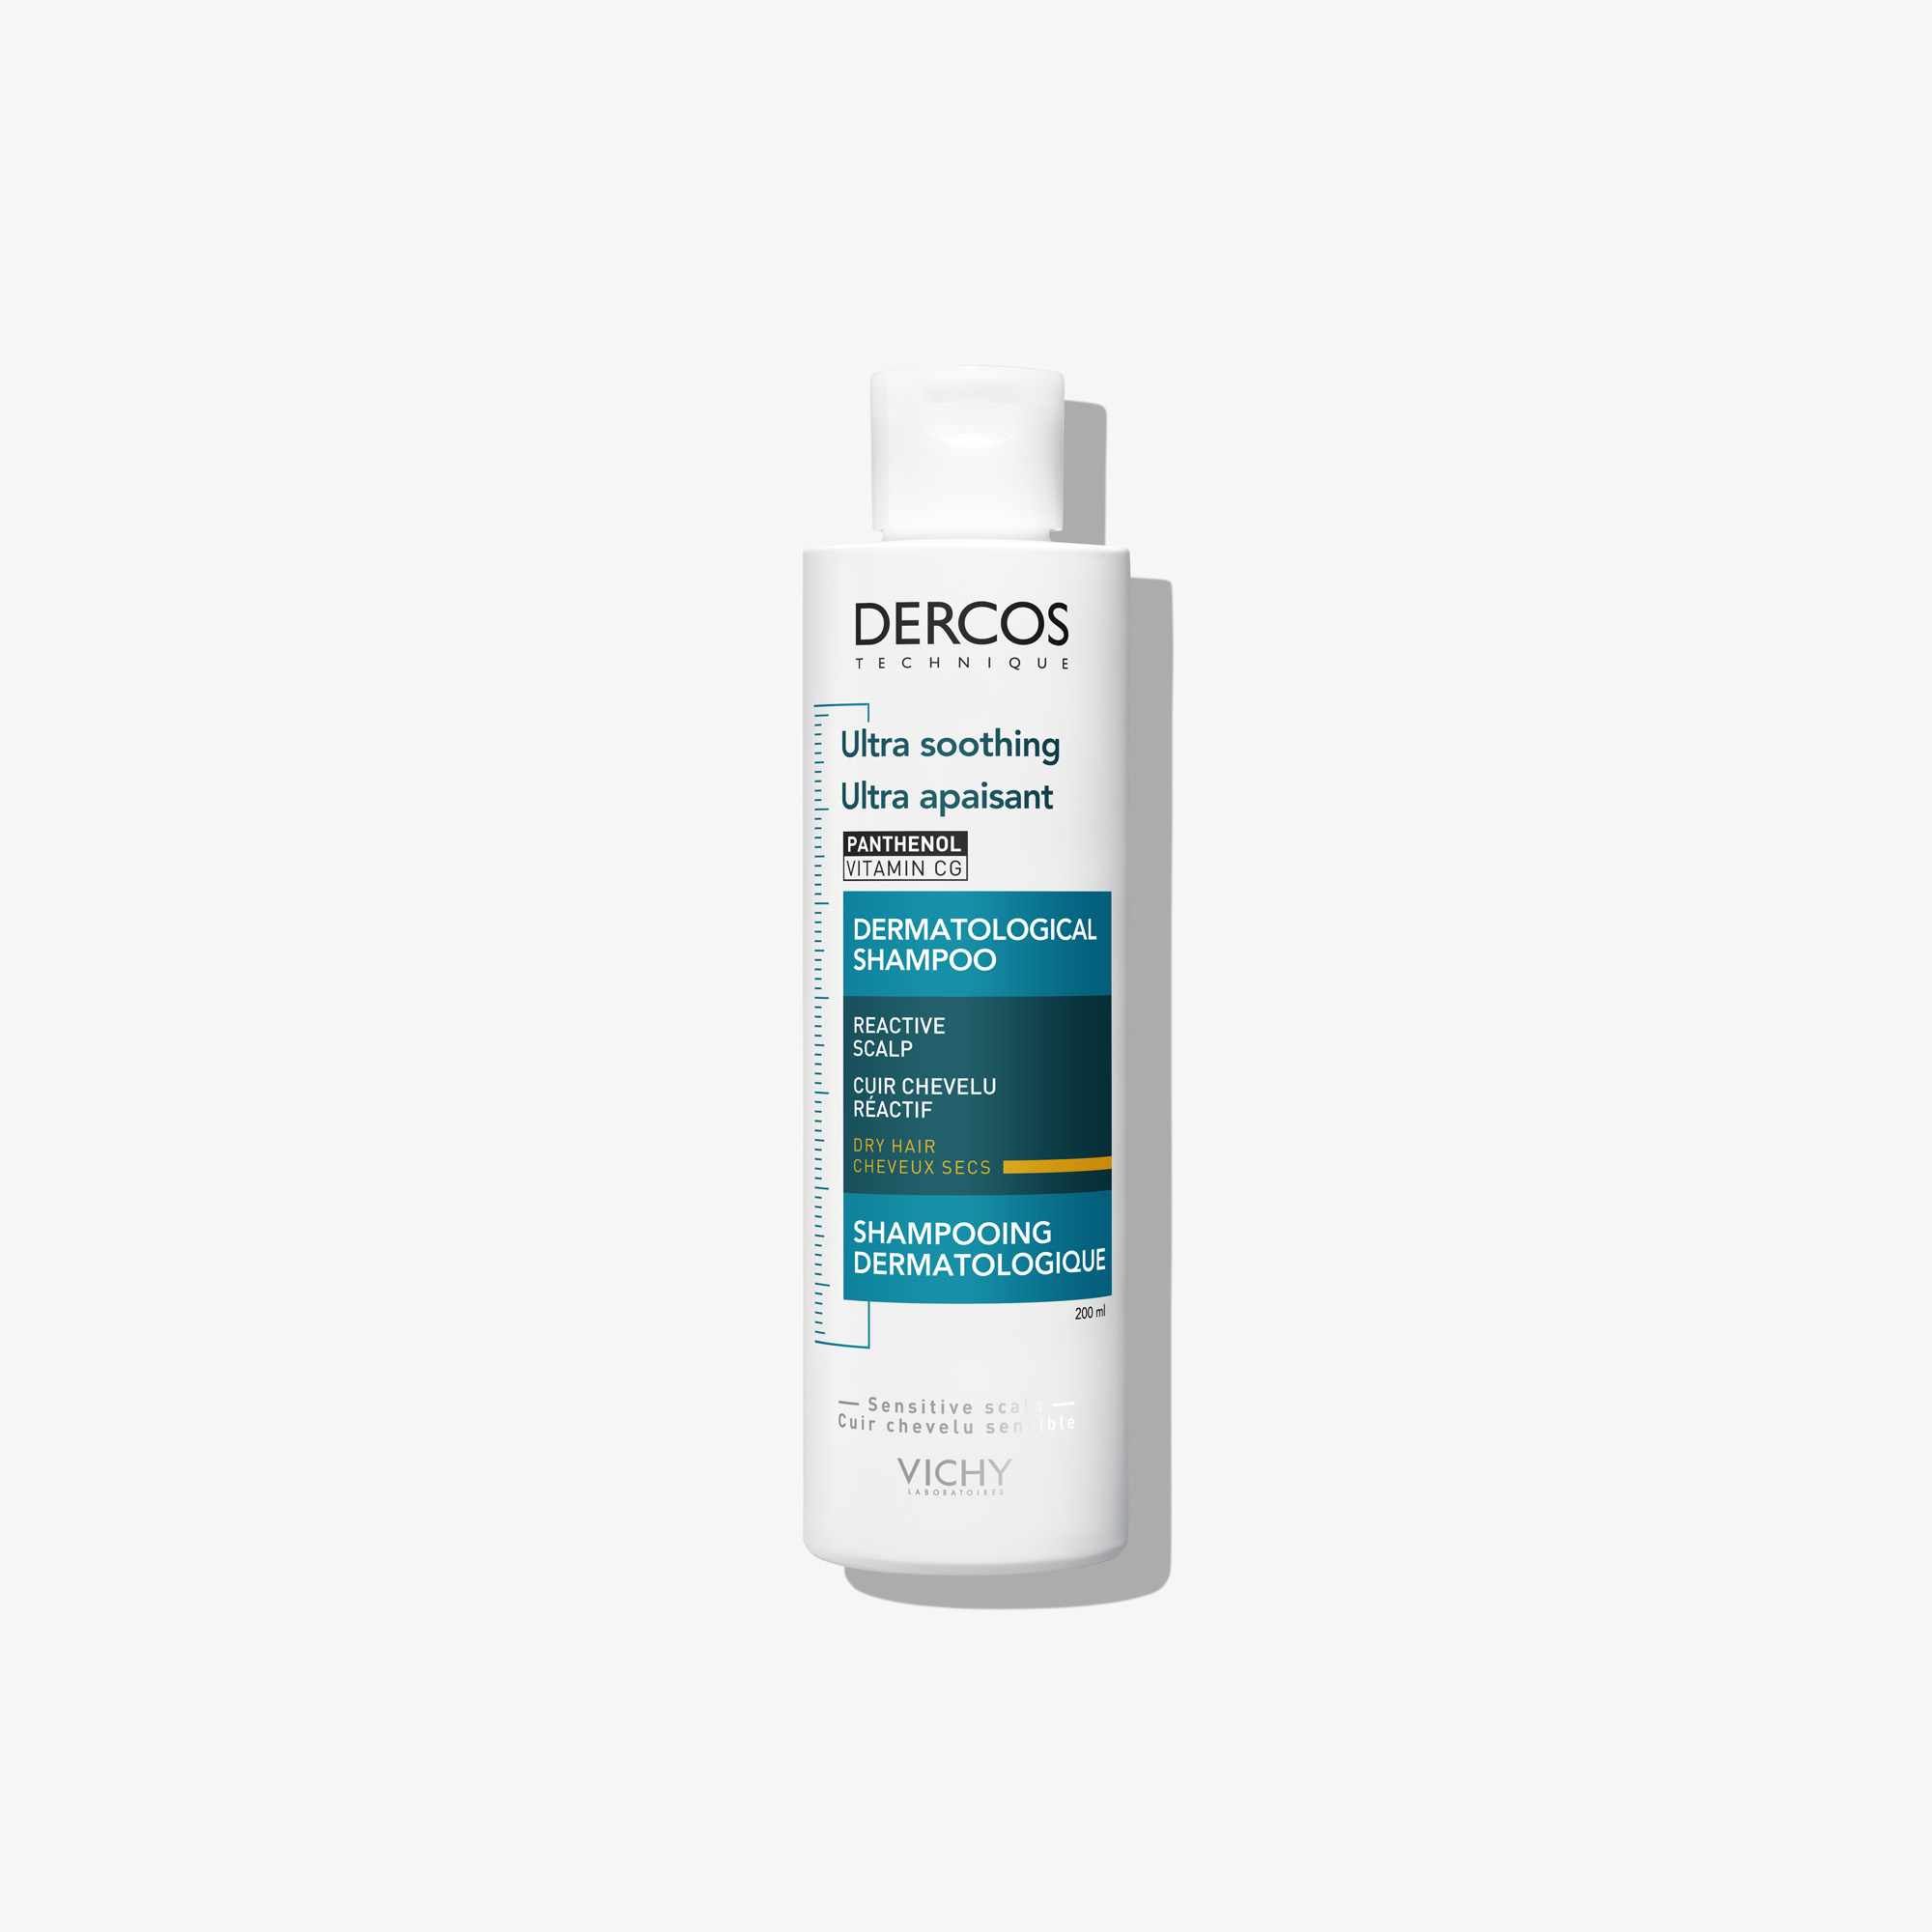 VIC_072_VICHY_DERCOS_Ultra Soothing - Shampoo for Reactive Scalp and Dry Hair-200ml